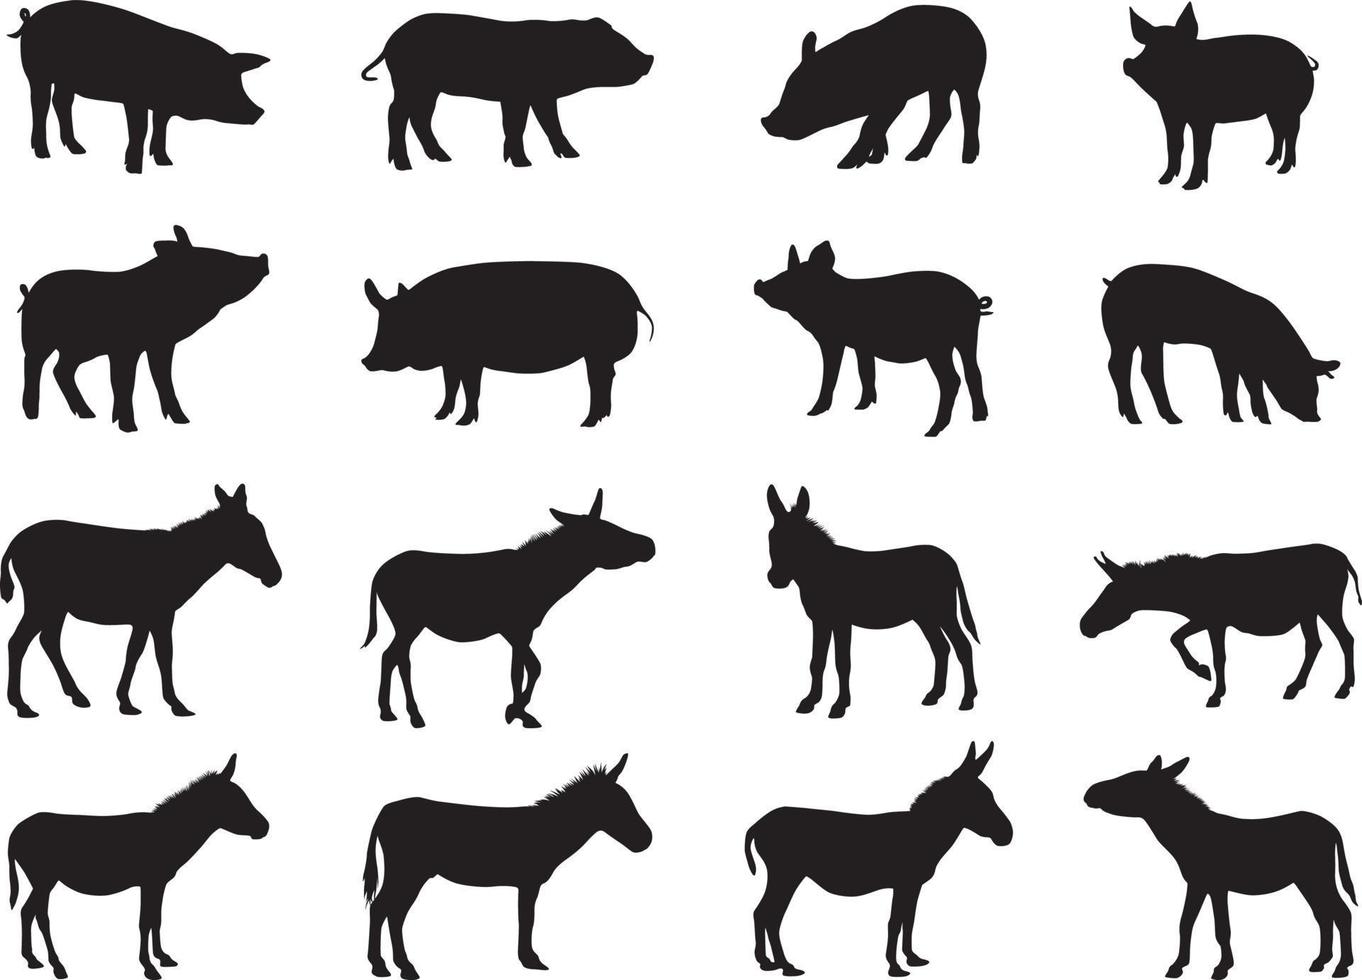 Pig and donkey silhouette vector